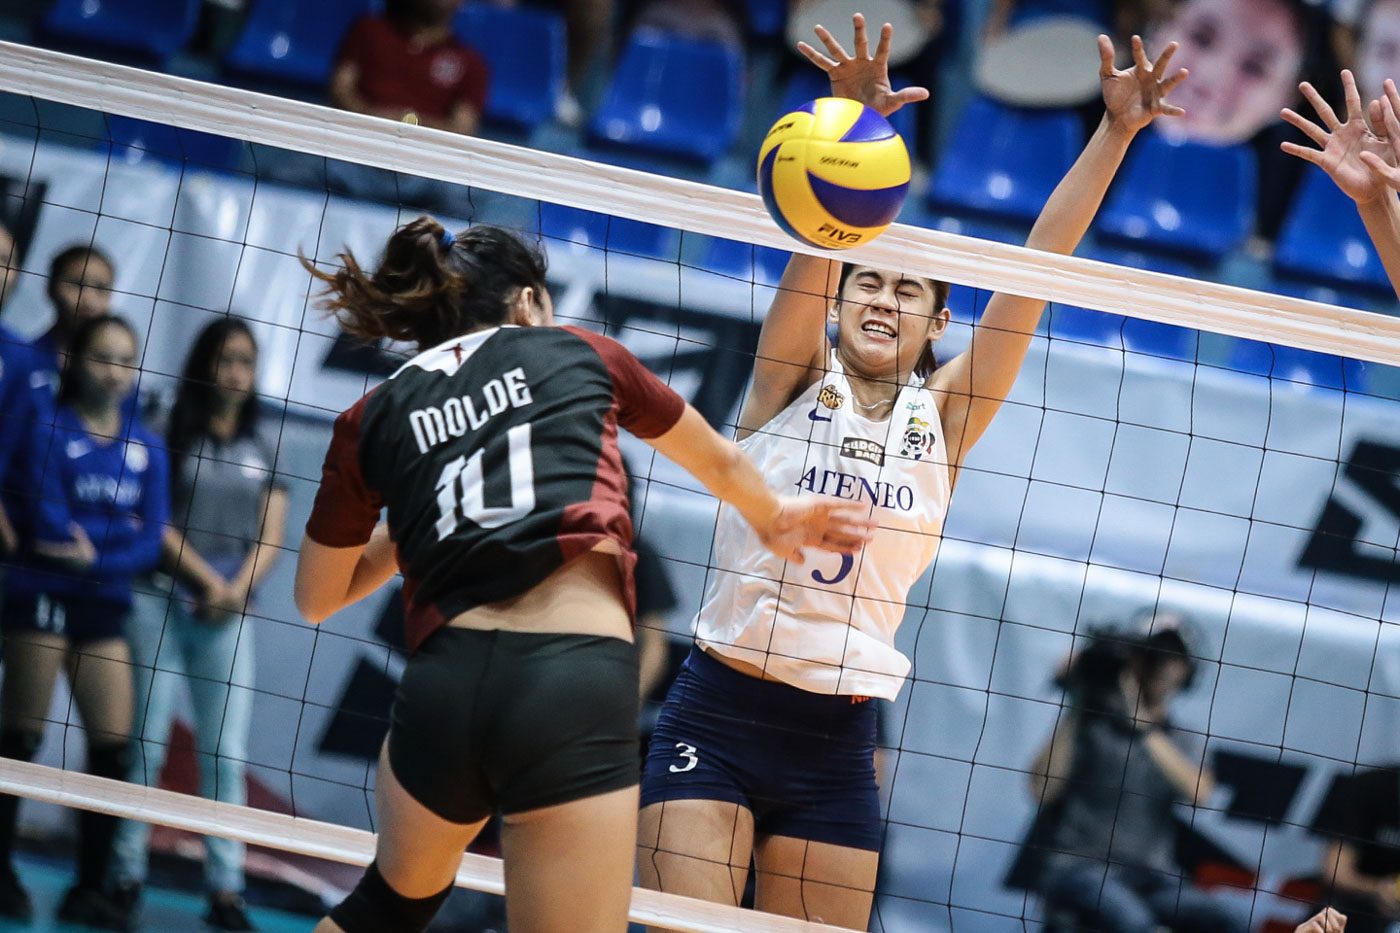 Ateneo’s Deanna Wong ‘playing own game’ despite comparisons to Cobb of DLSU